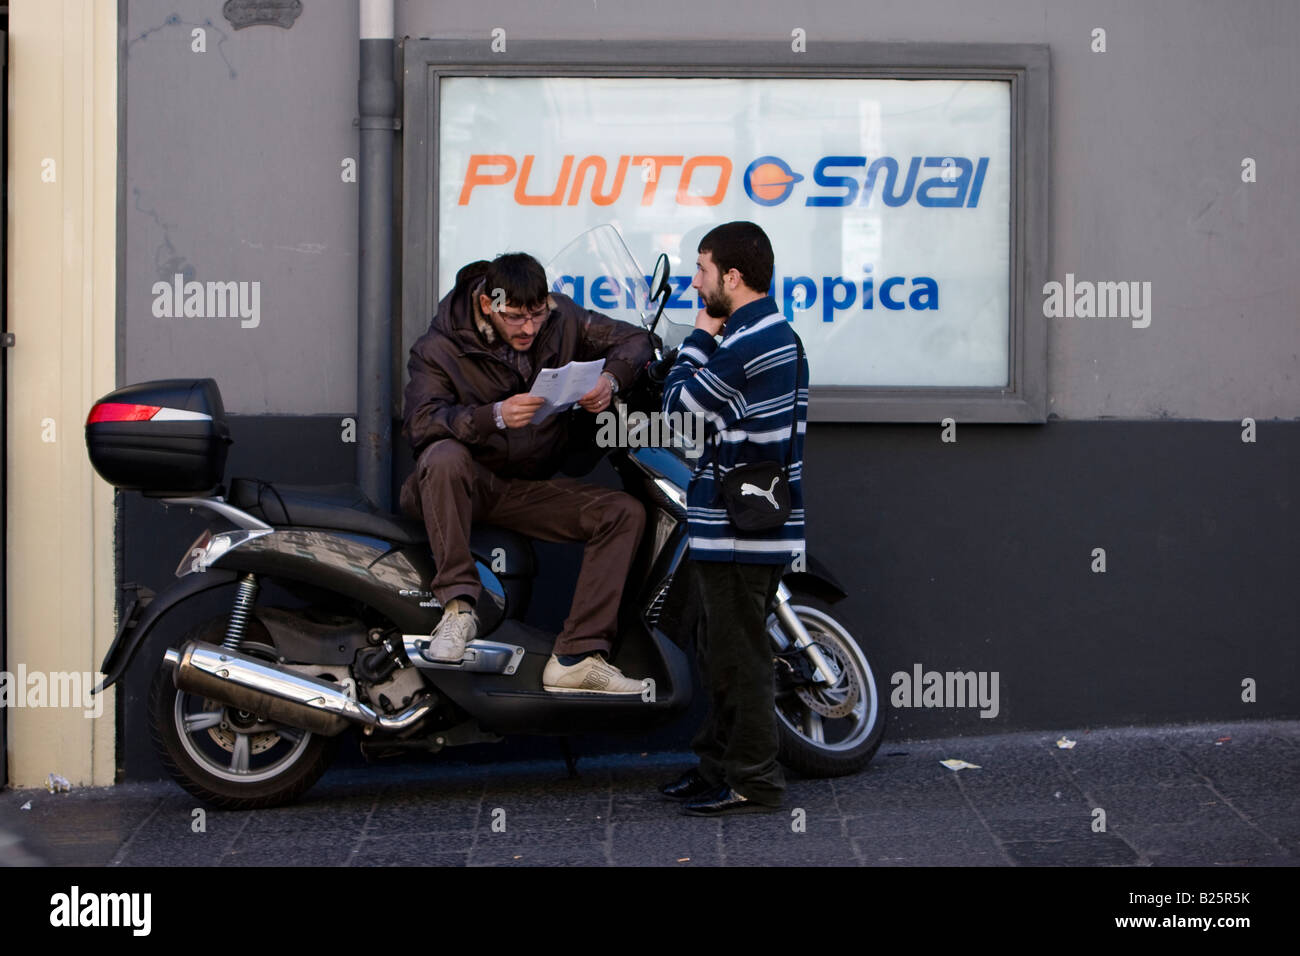 Two men outside an betting office in Catania, Sicily, Italy Stock Photo